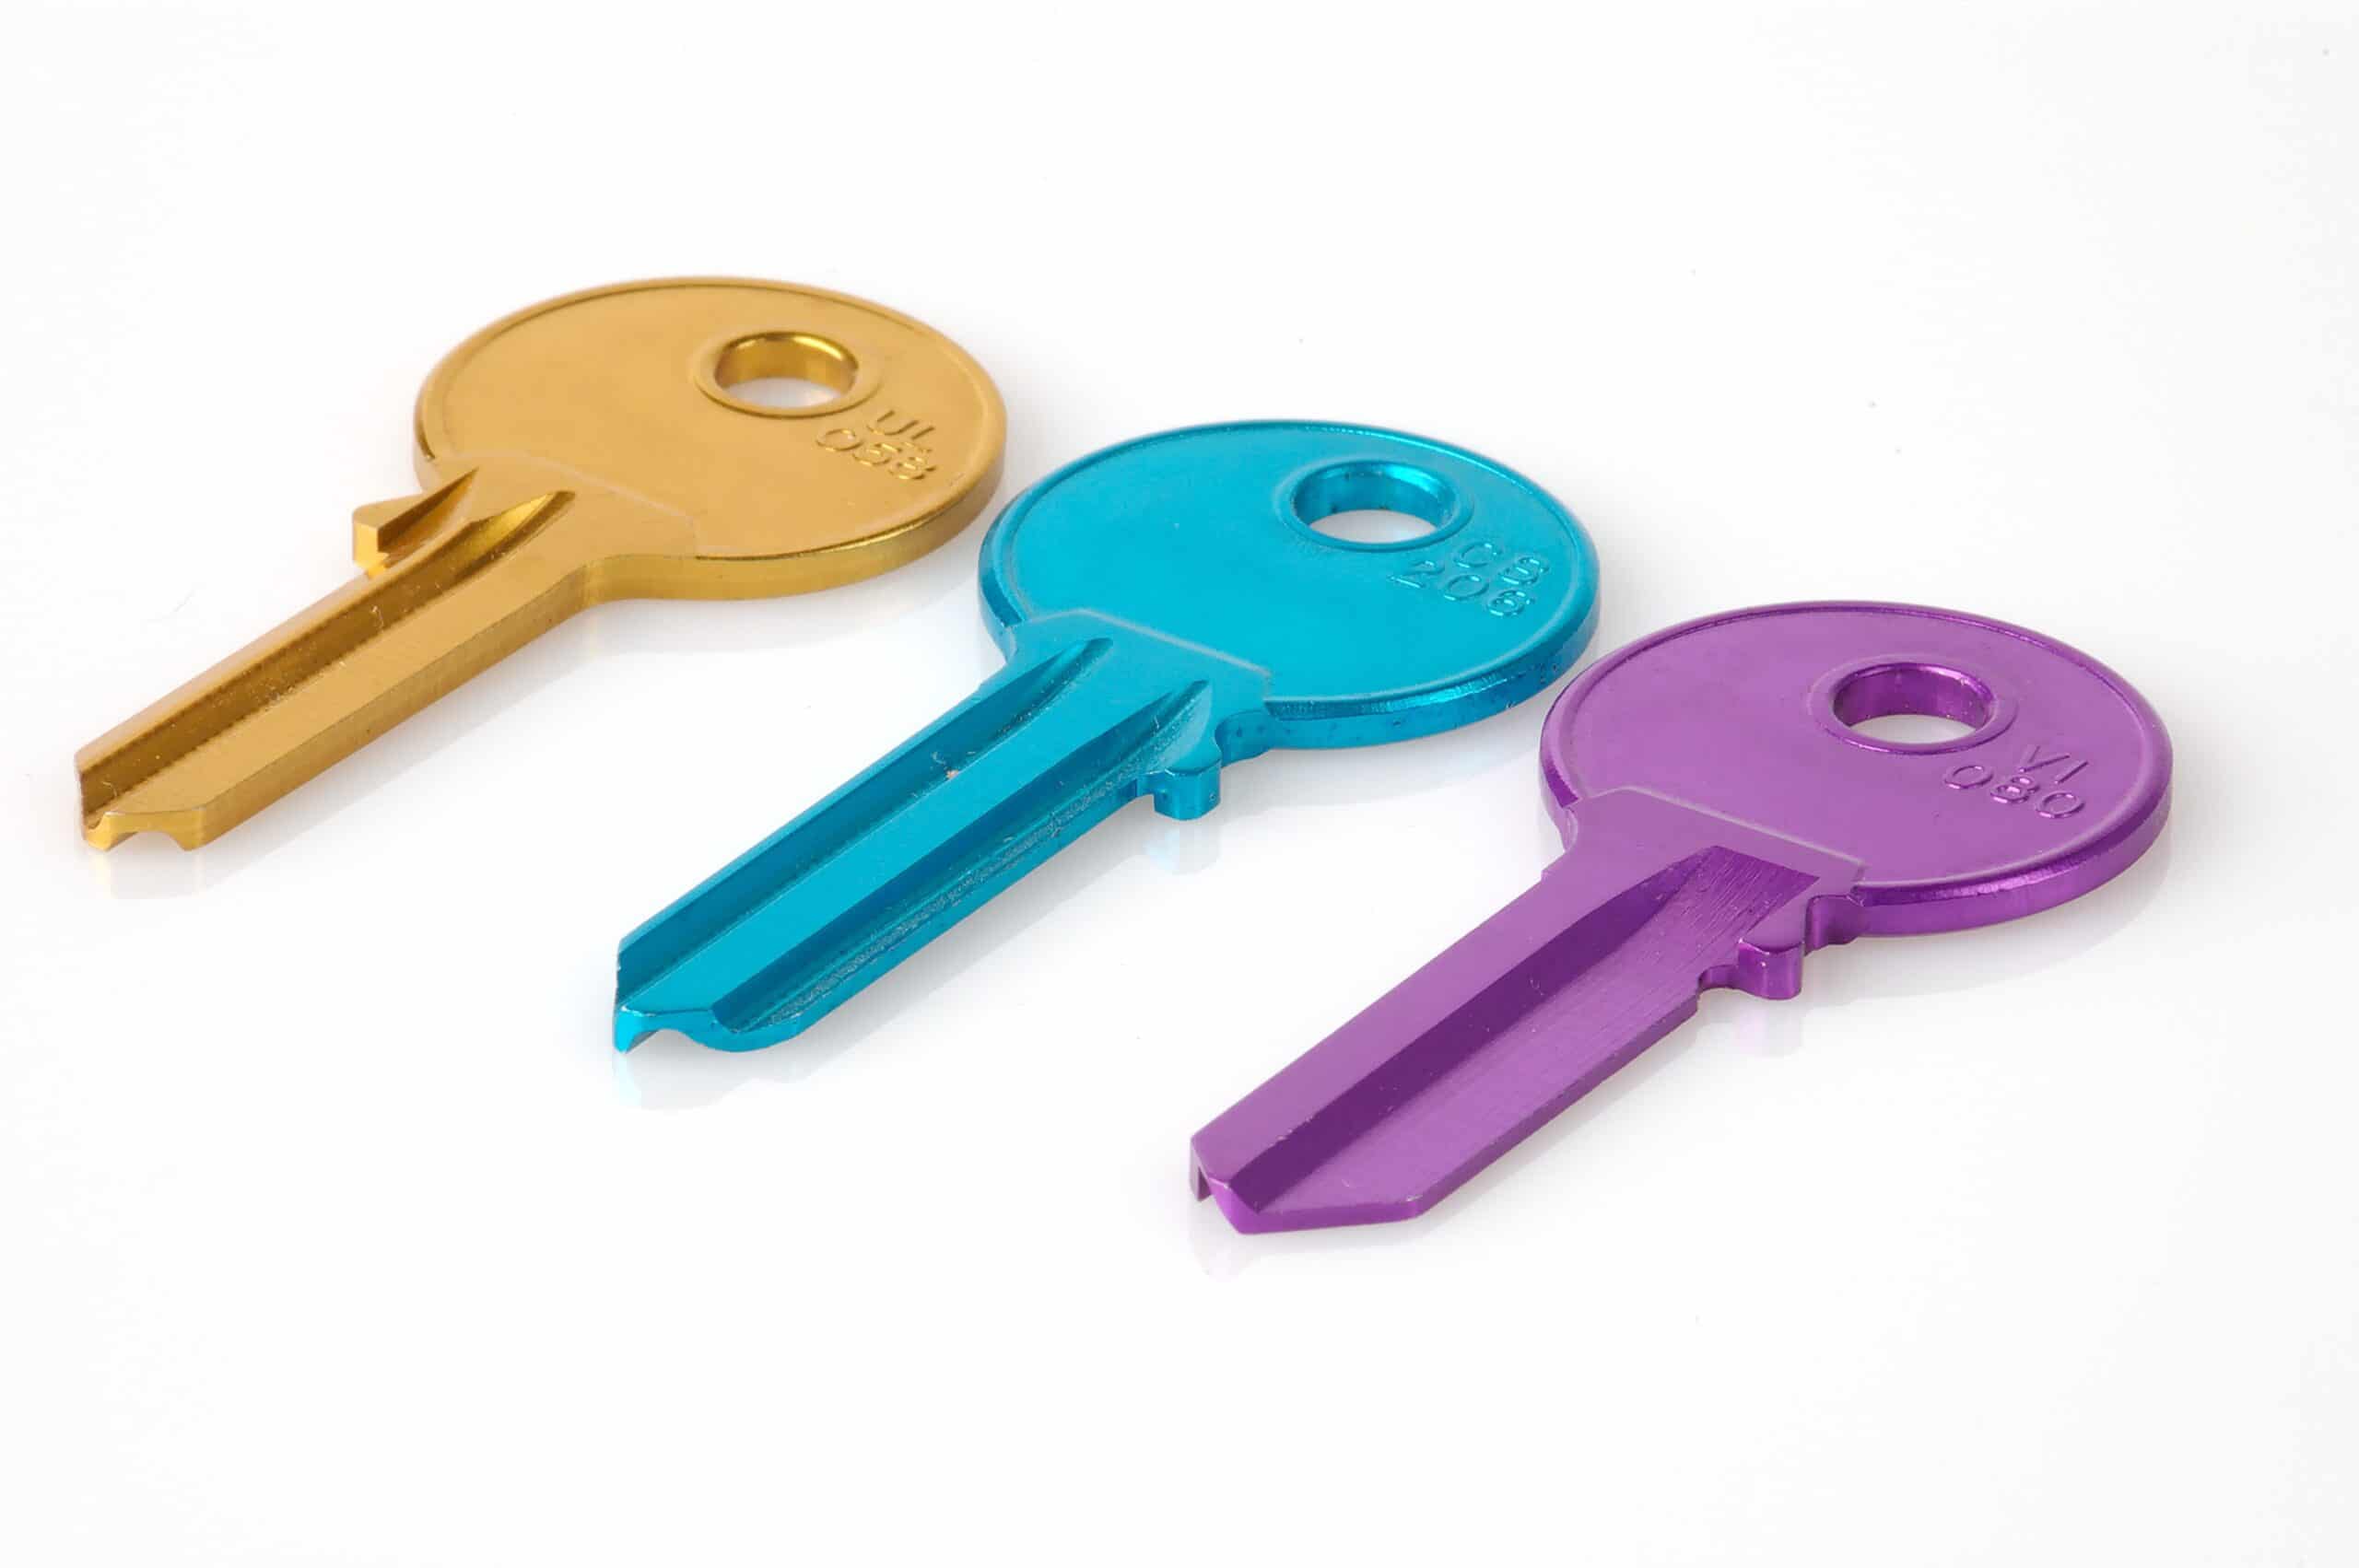 A now of brightly coloured metal keys